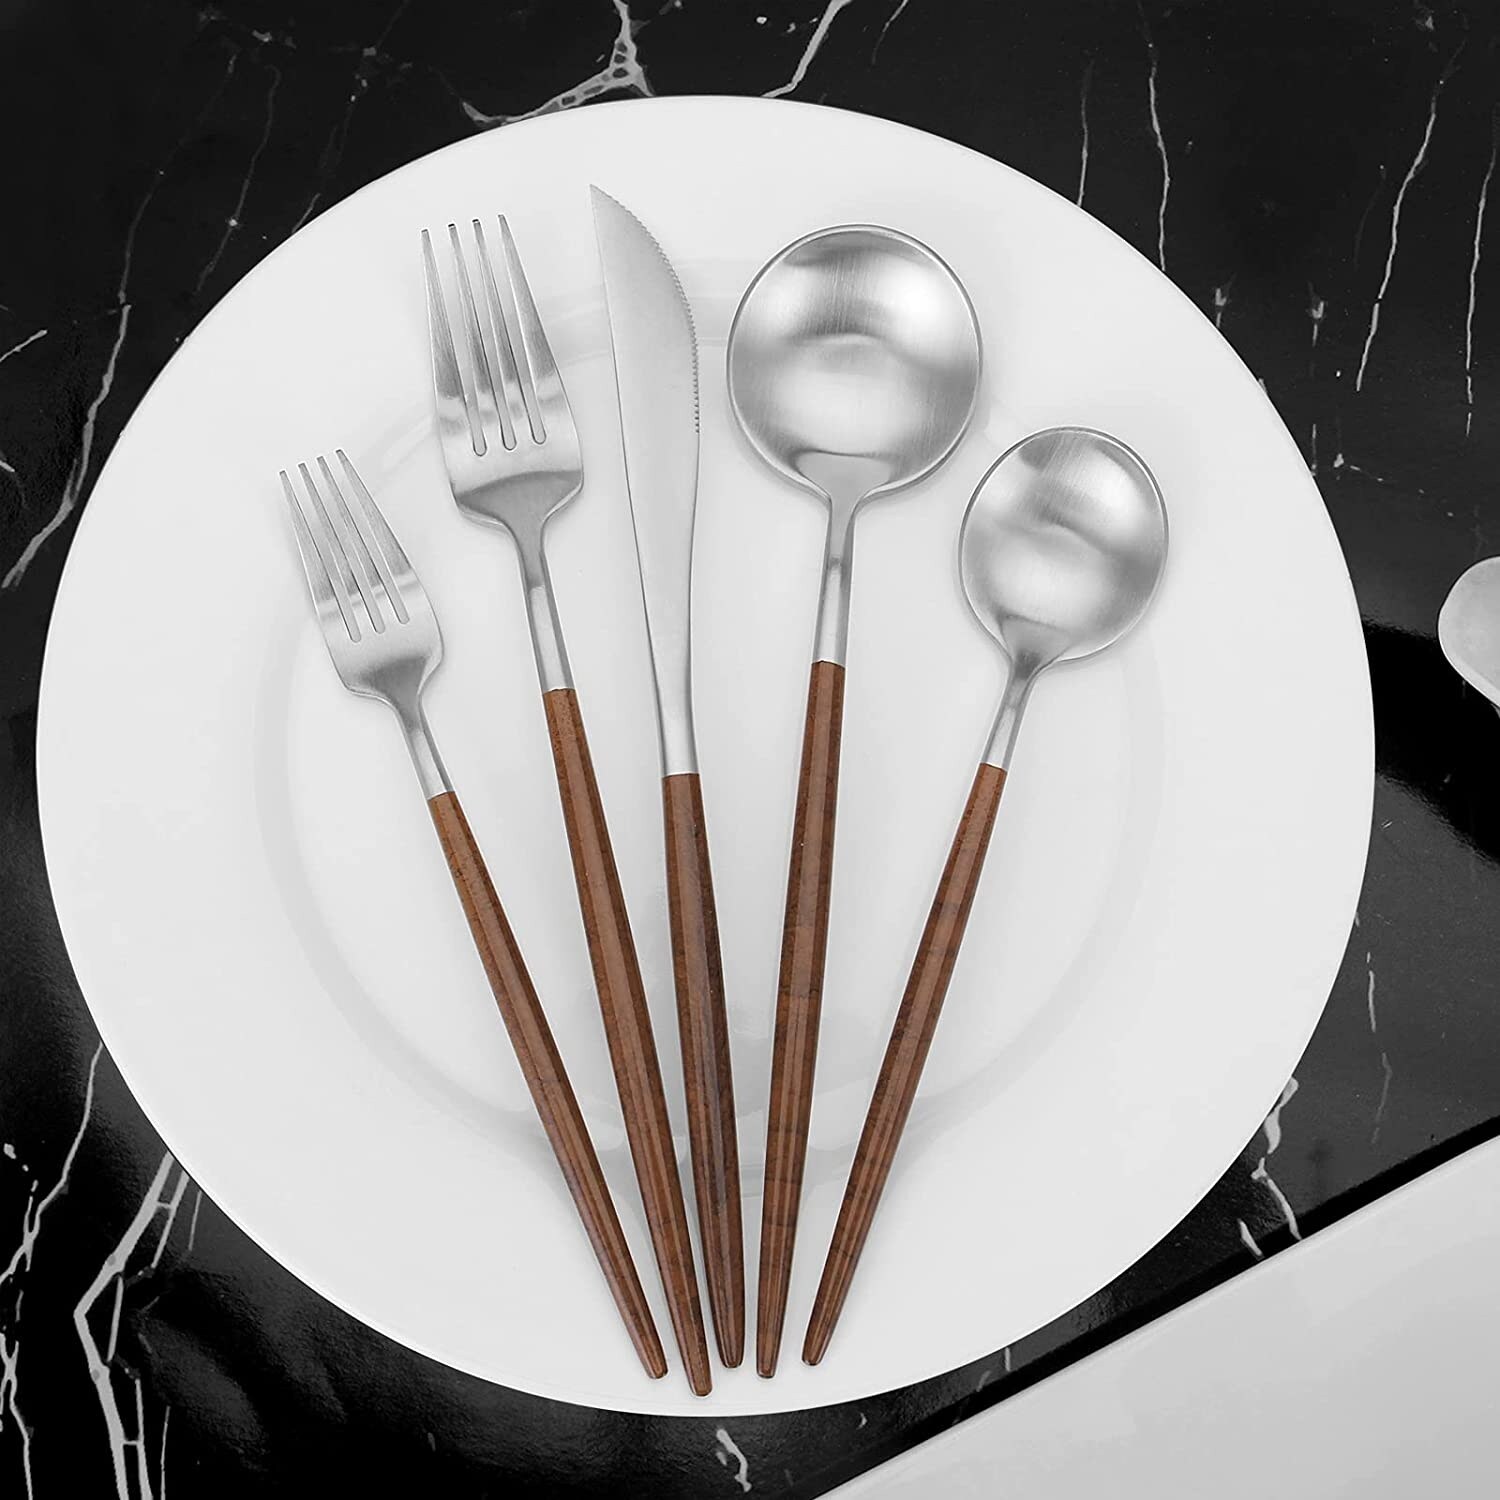 https://ak1.ostkcdn.com/images/products/is/images/direct/12bfb36cf090d71f1764baa5b8736b5b5c18c4af/Silverware-Set-with-black-handle%2C-Vanys-30-Piece-Stainless-Steel-Cutlery-Flatware-Set%2C-Kitchen-Utensil-Sets-for-6.jpg